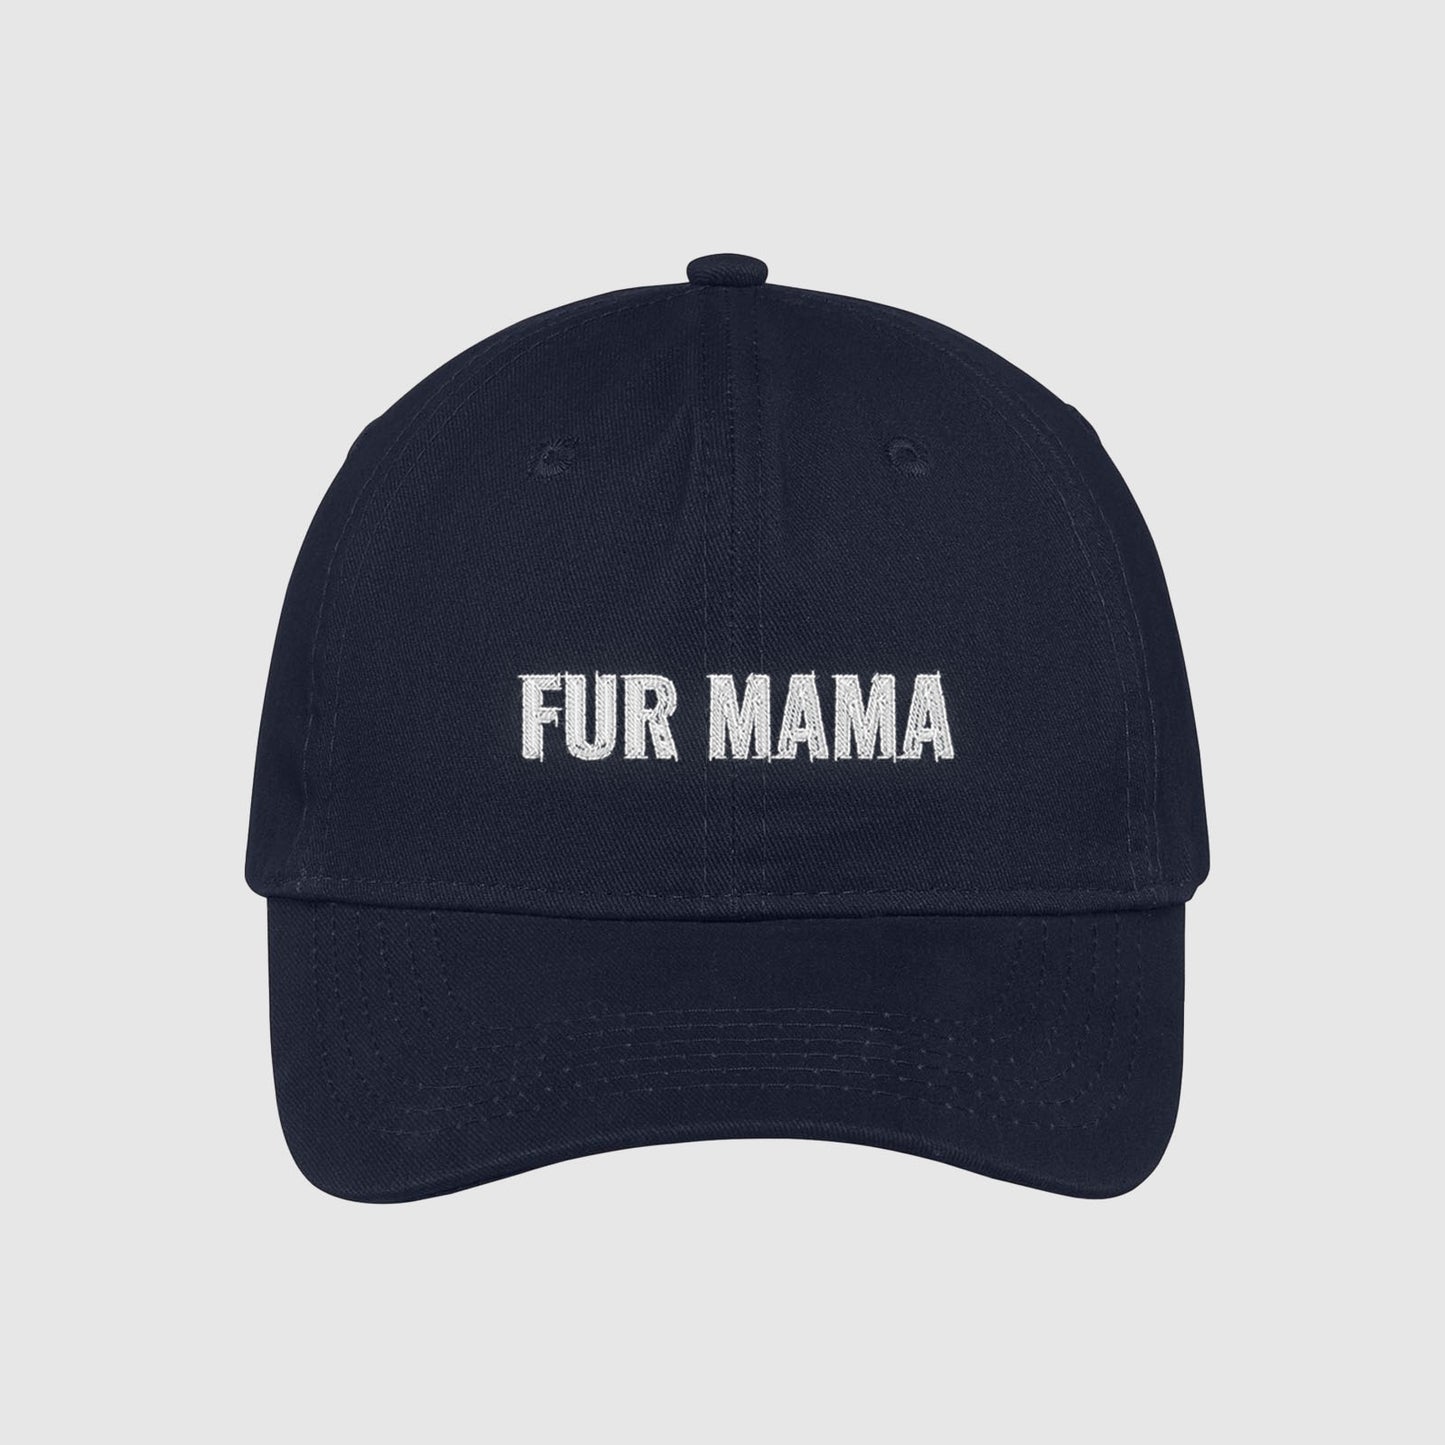 Navy Fur Mama dad Hat for dog moms embroidered with white text.